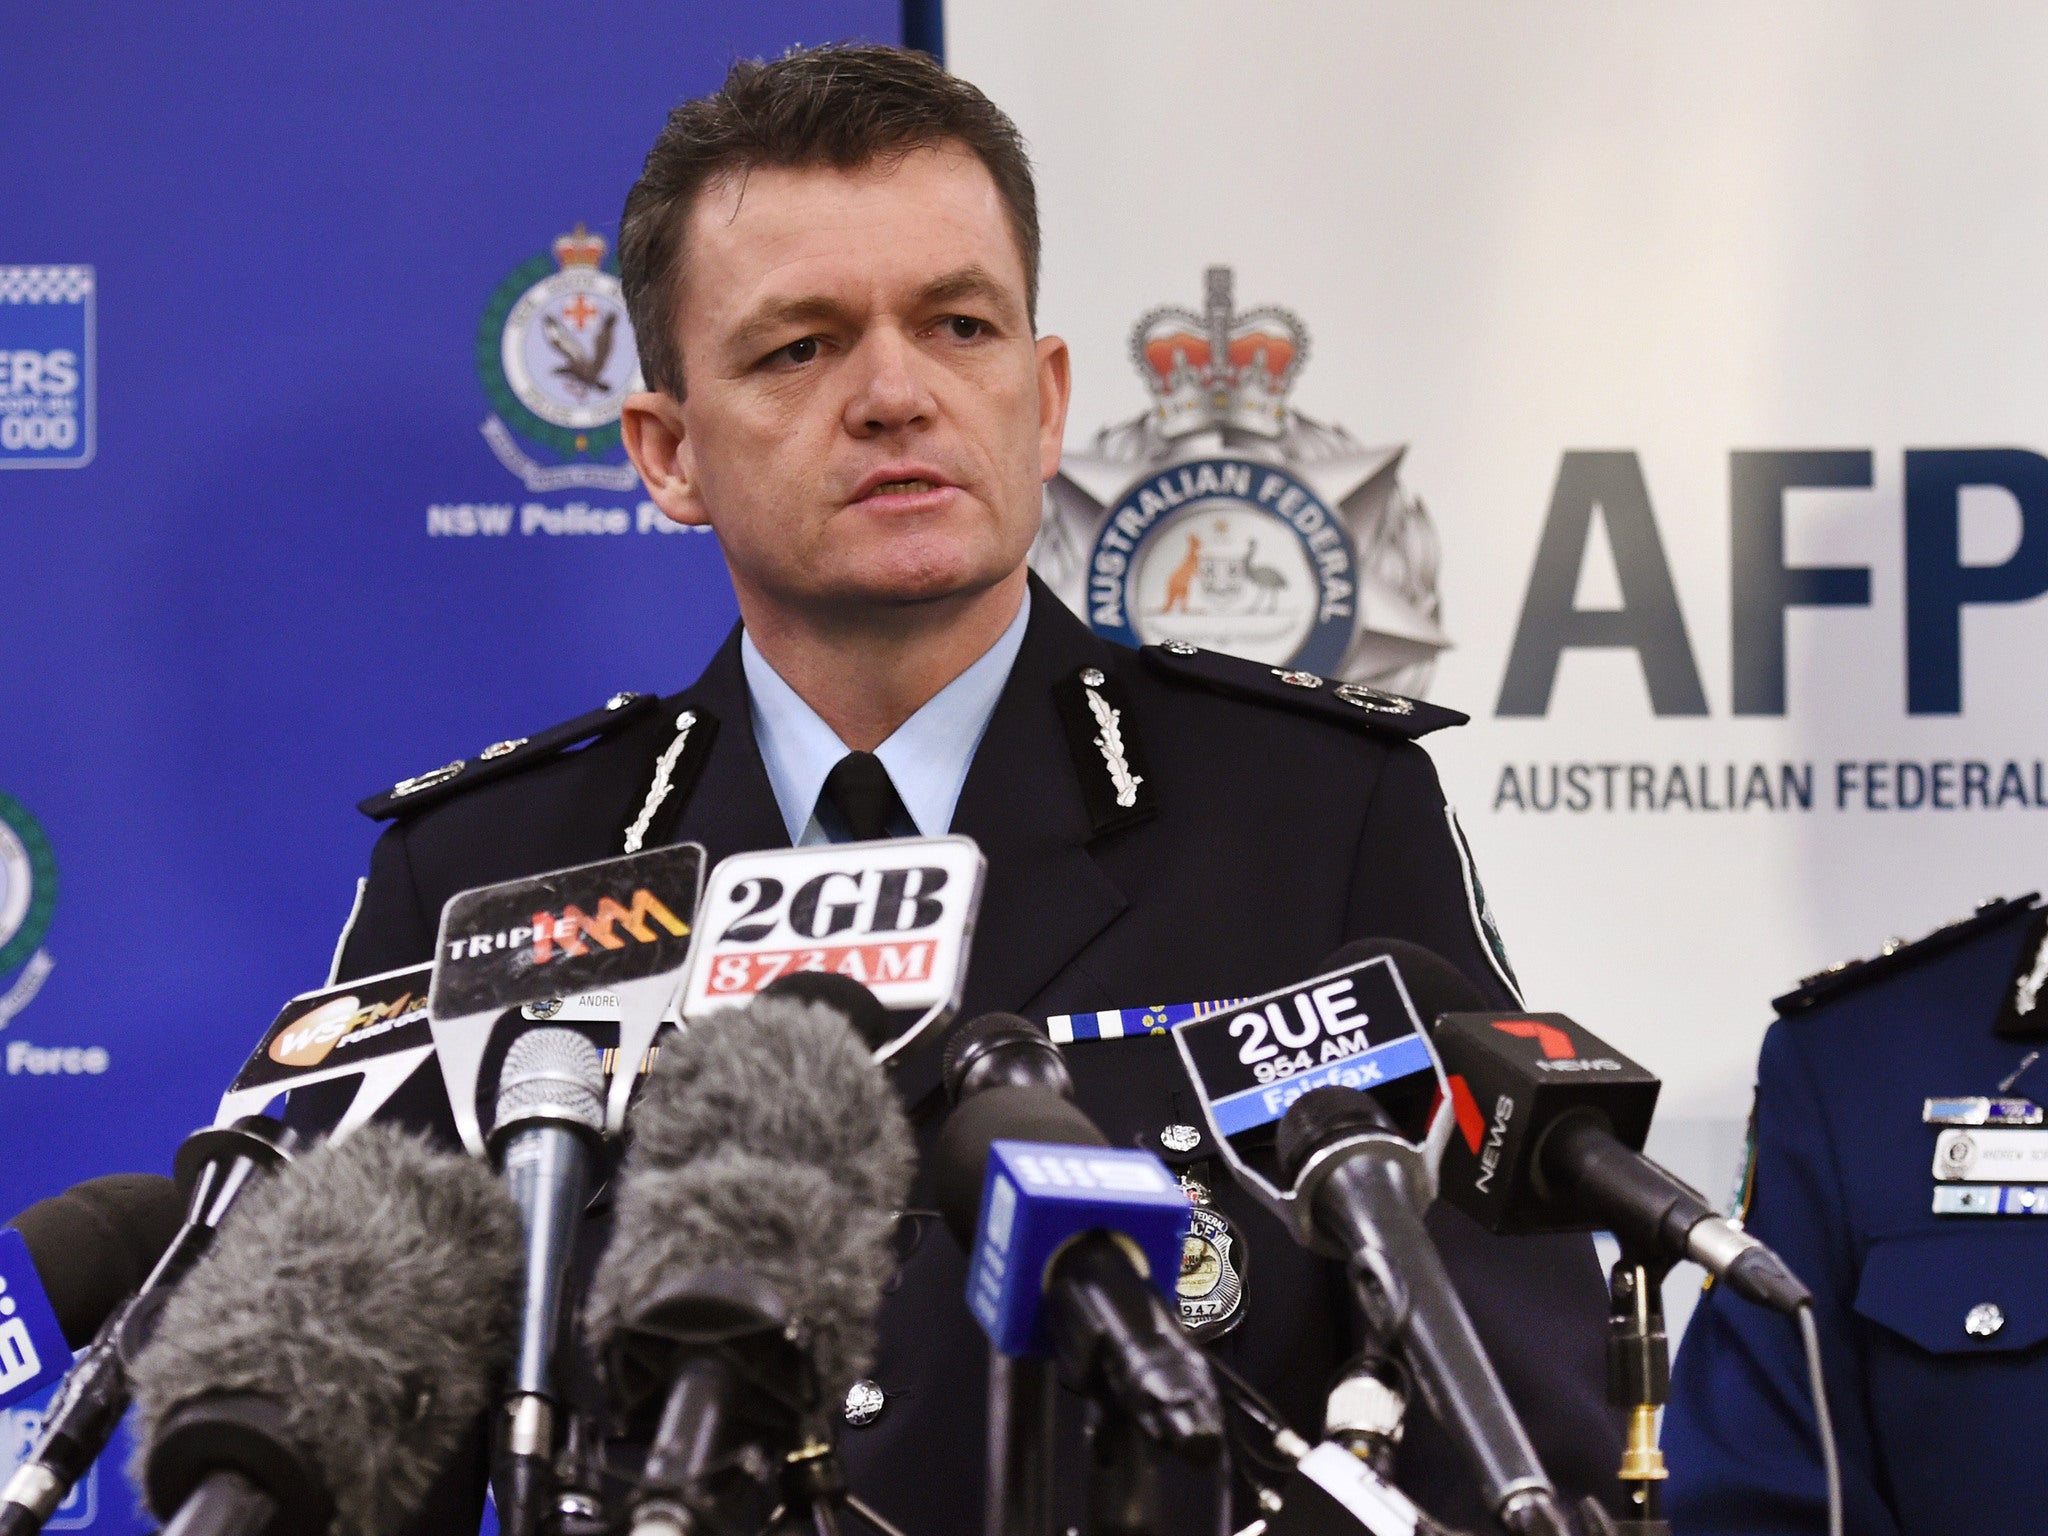 Australian Federal Police Commissioner Andrew Colvin today defended the AFP's decision to hand information to Indonesian police that led to the arrests of the Bali Nine